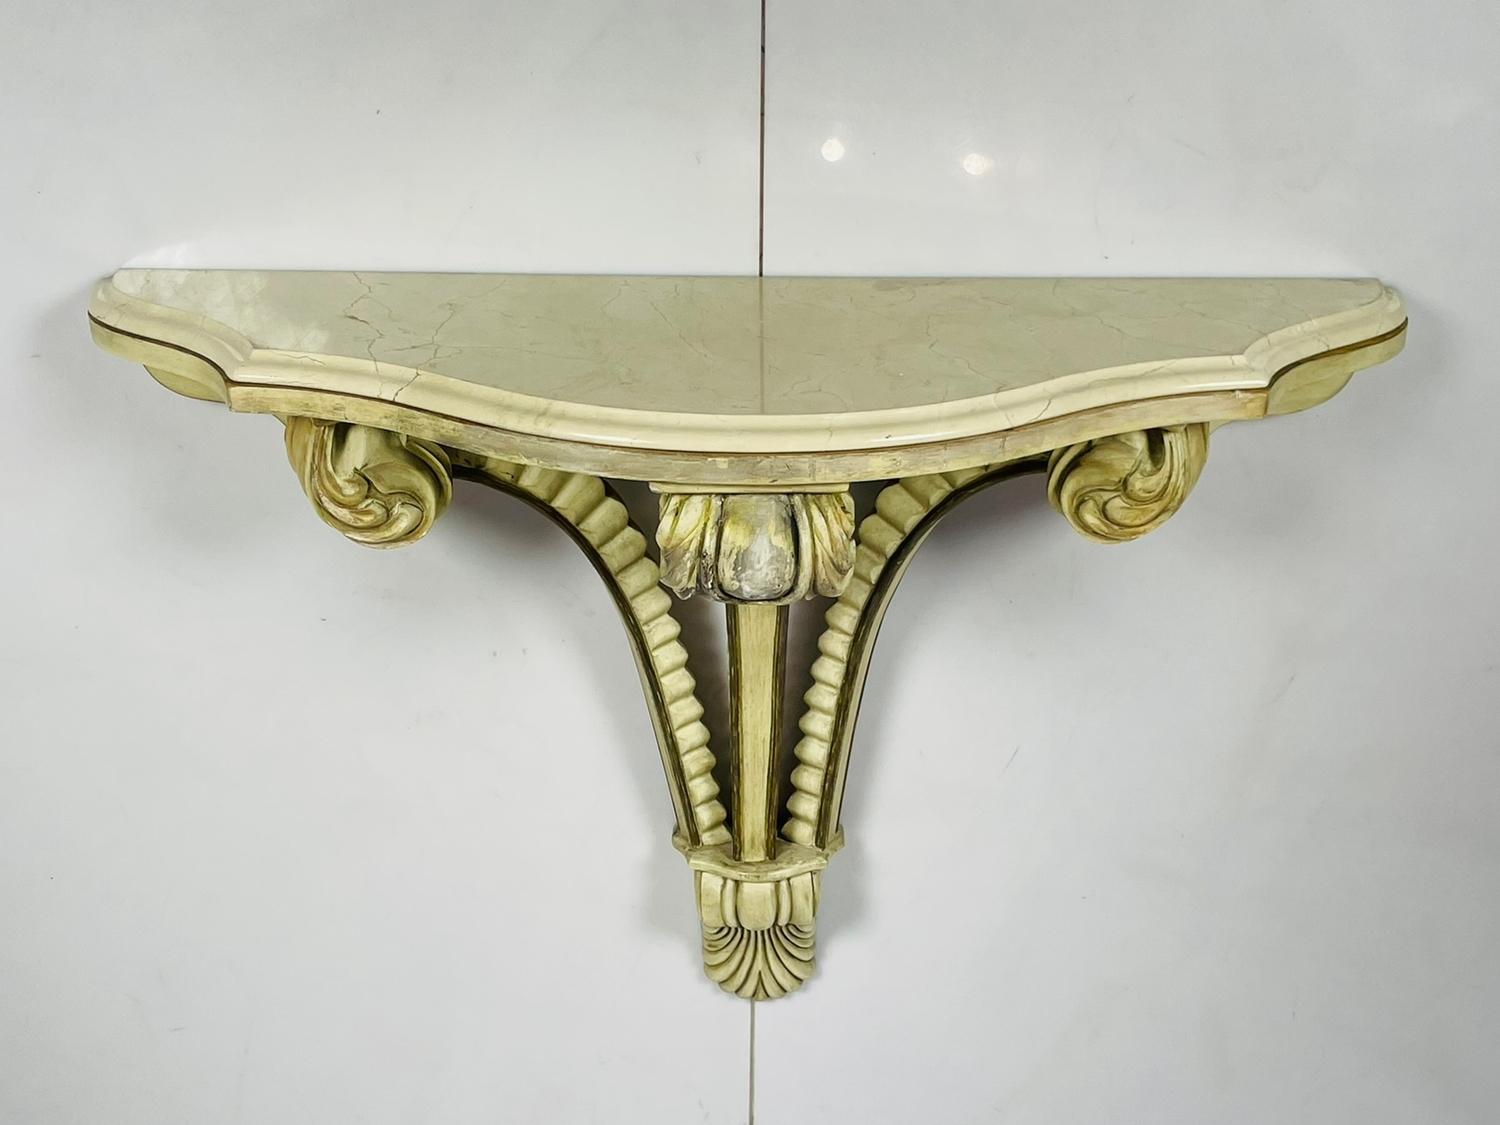 Introducing our exquisite Art Deco Wall Console With a Marble Top, proudly made in the USA during the 1940s. This stunning piece of furniture is sure to elevate your home décor with its vintage charm and timeless elegance.

Crafted from